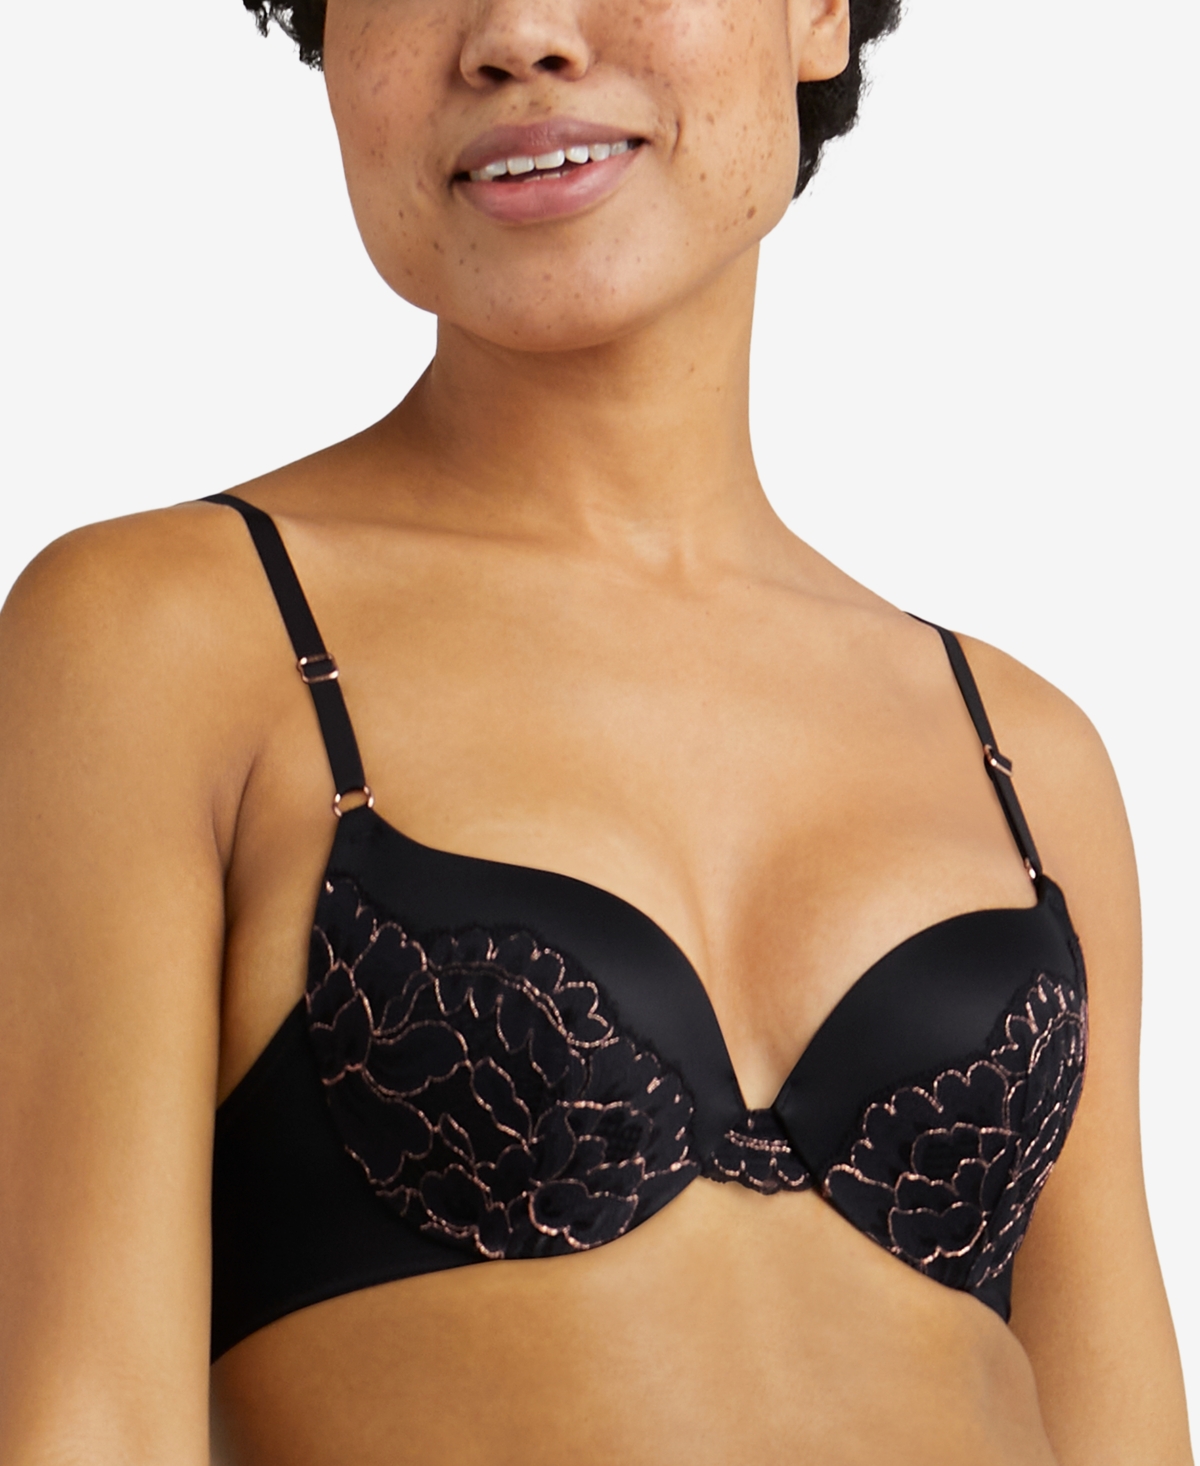 Maidenform Love the Lift Mesh Push-Up Bra DM9900 - Eclipse Red Rose Gold